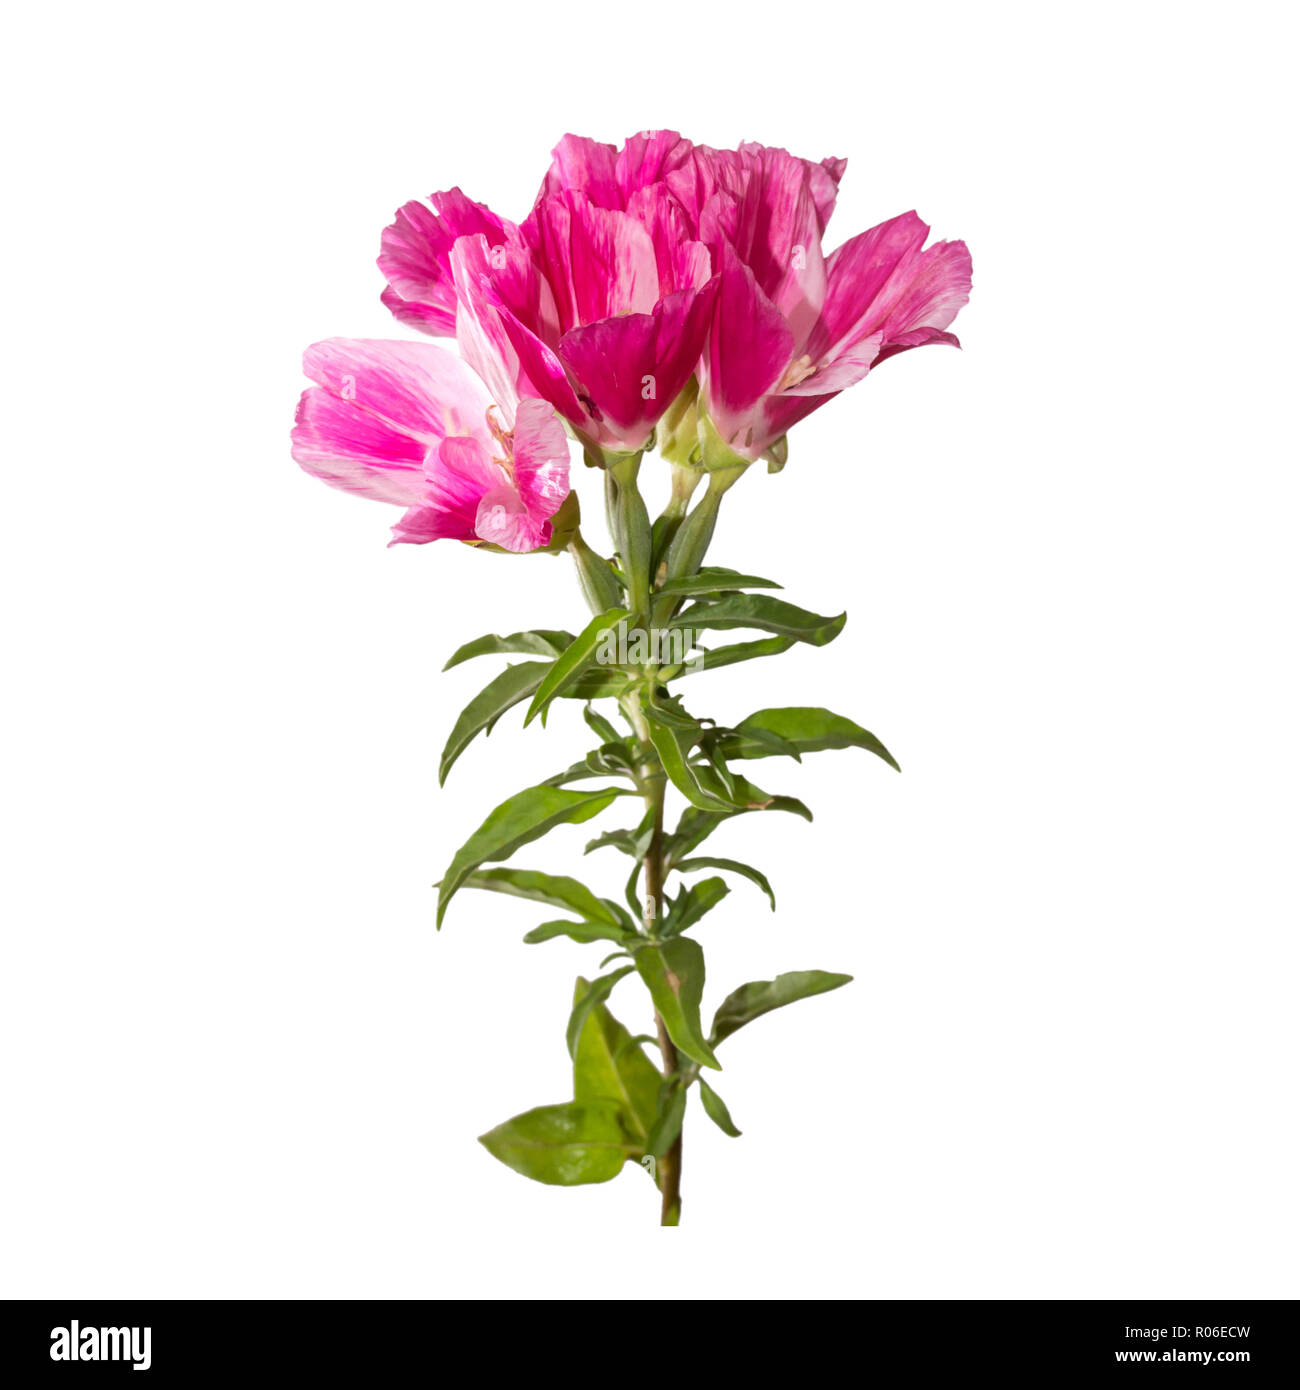 Godetia flower isolated. A branch of beautiful pink and purple spring flowers Stock Photo